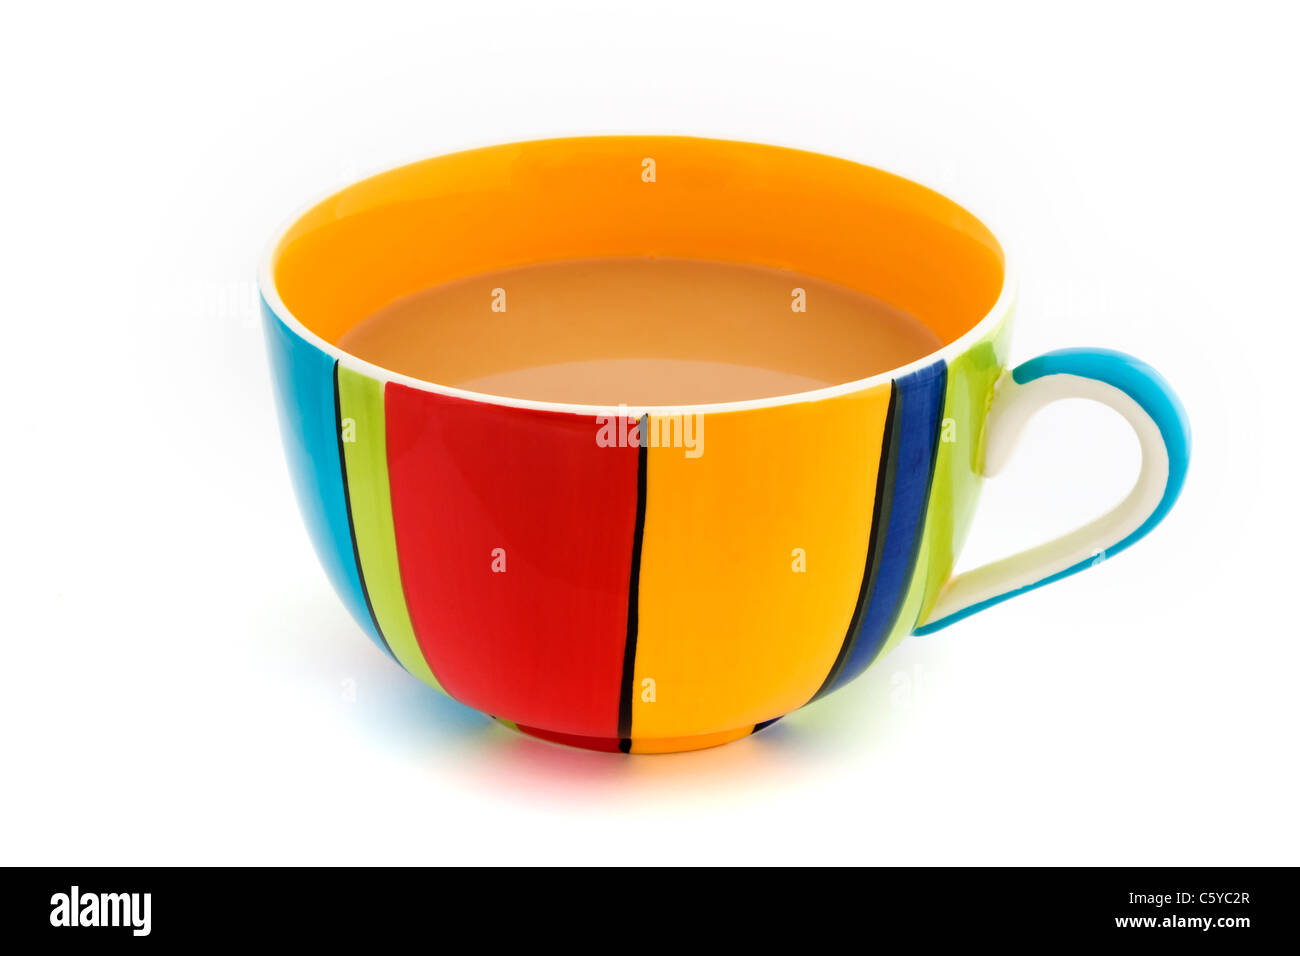 Stripy coffe cup isolated on a white background Stock Photo